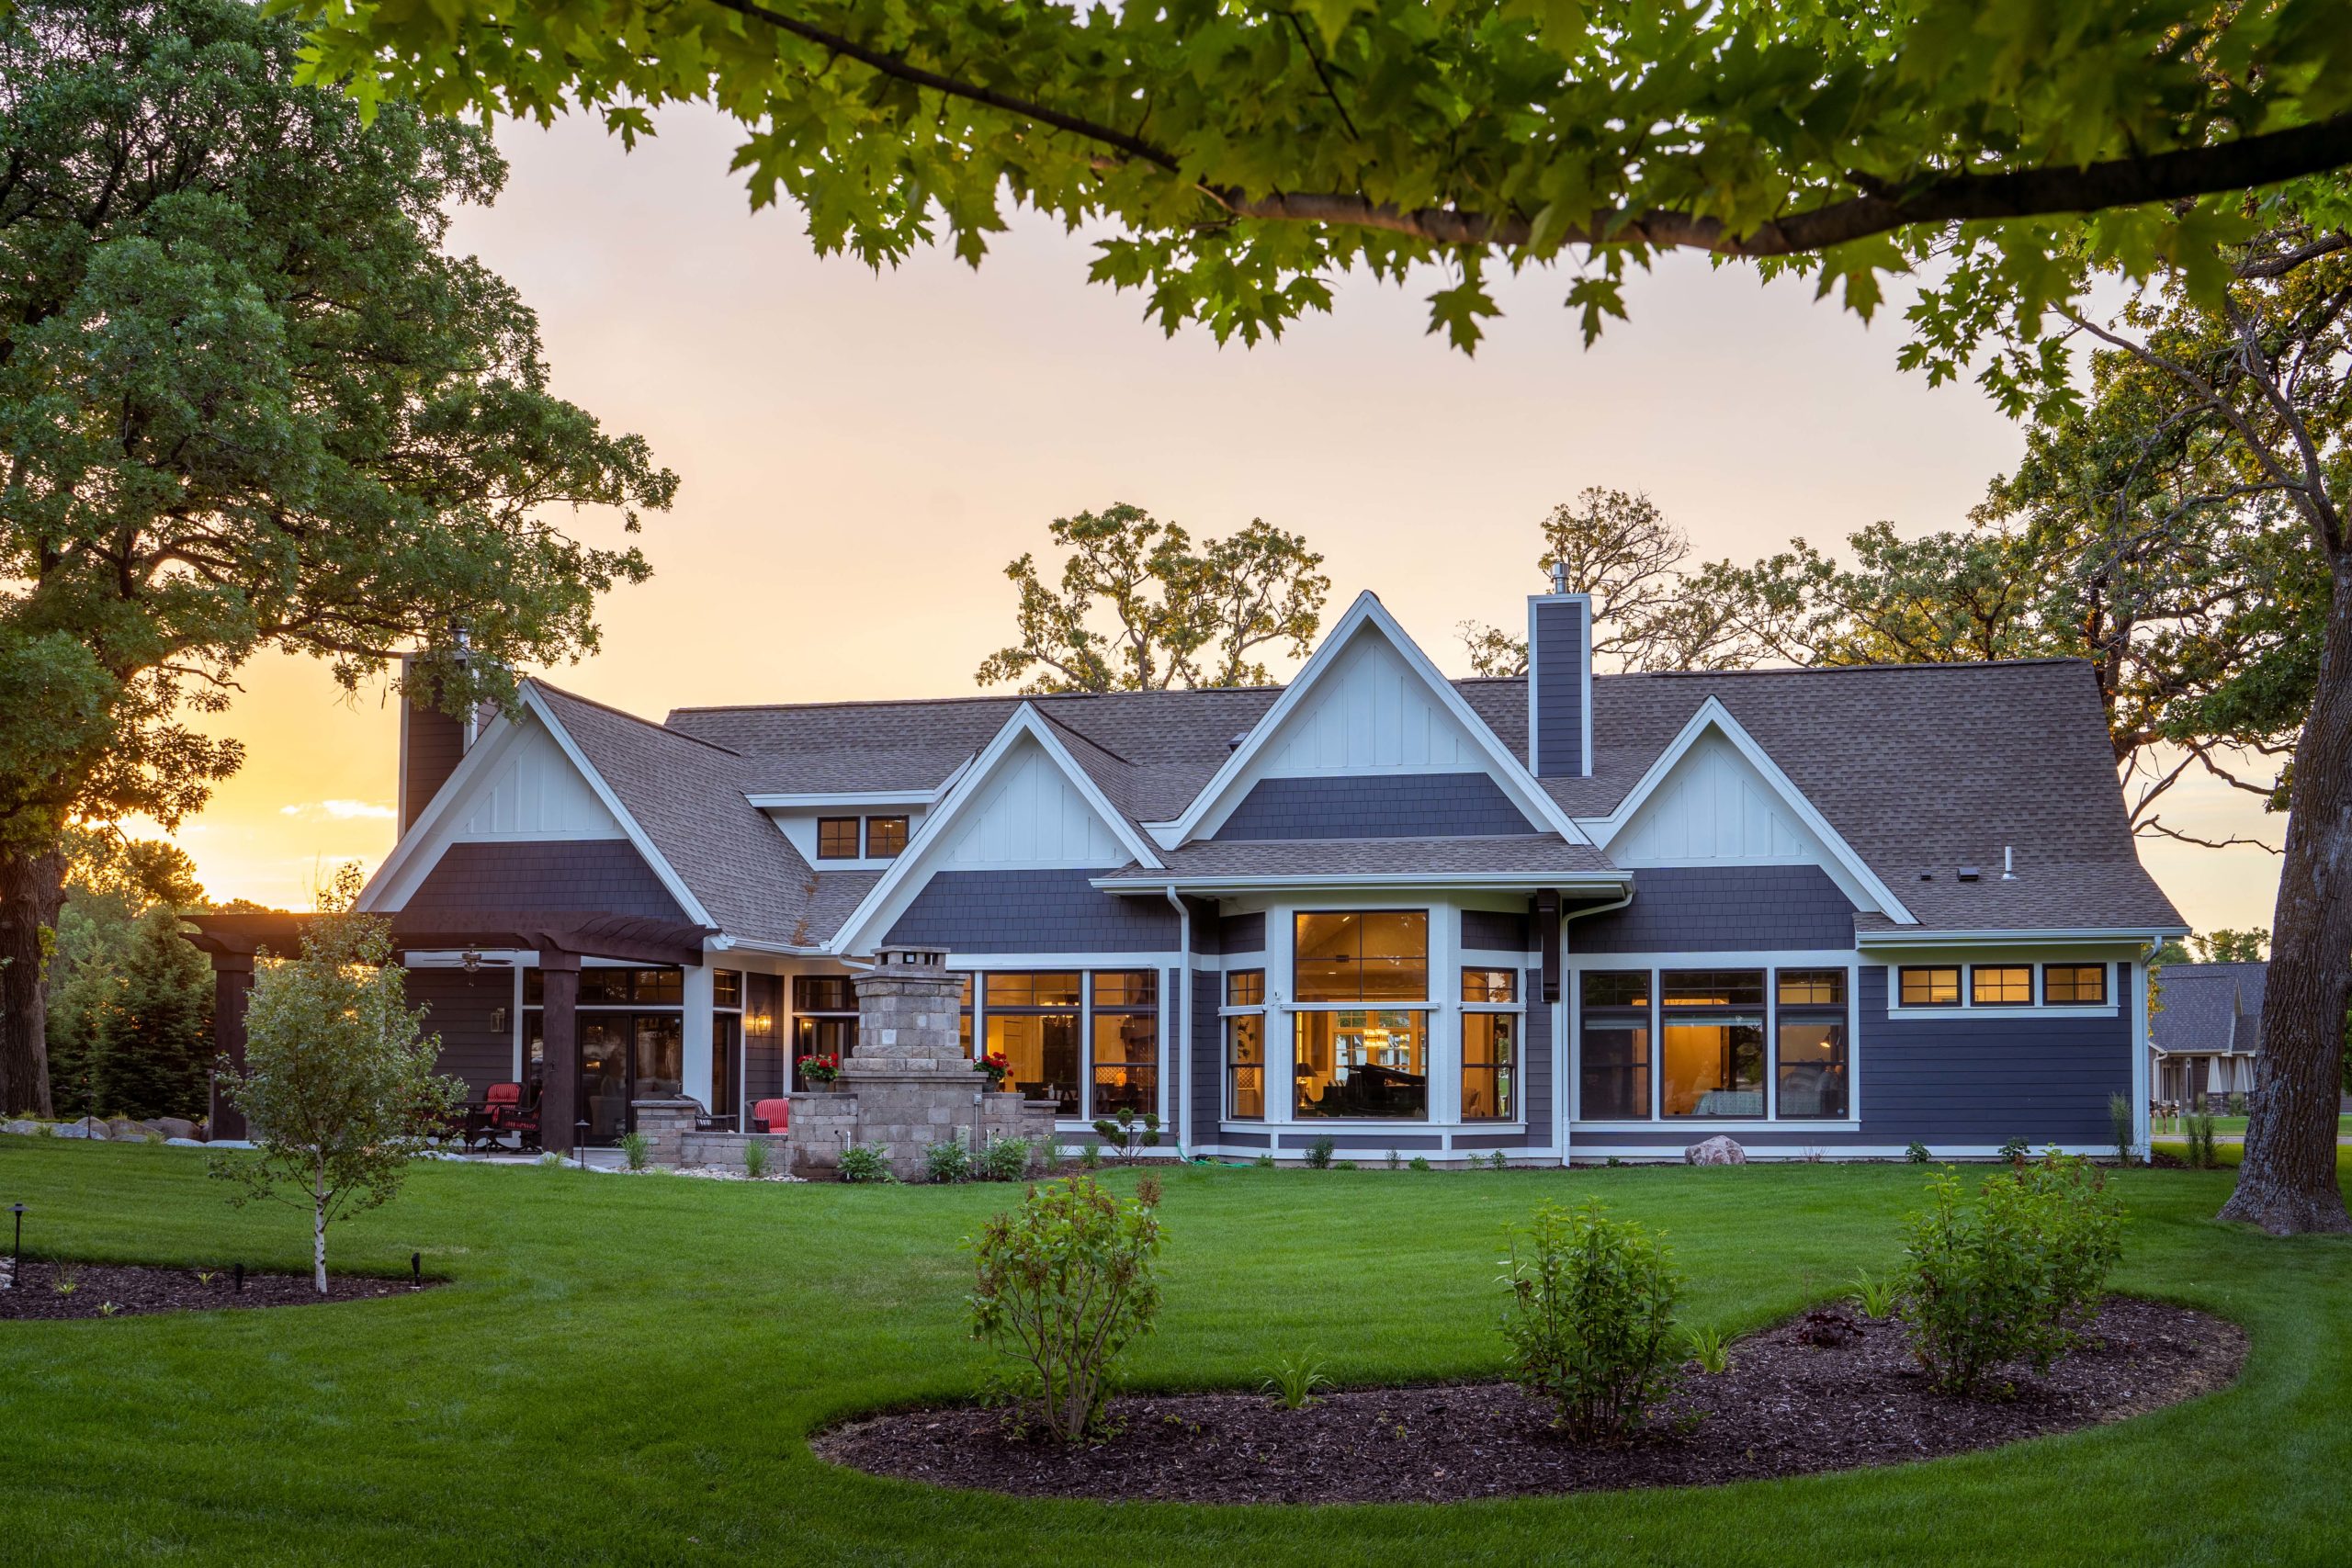 The Lake Escape custom home remodel featuring a large lawn and trees at dusk.